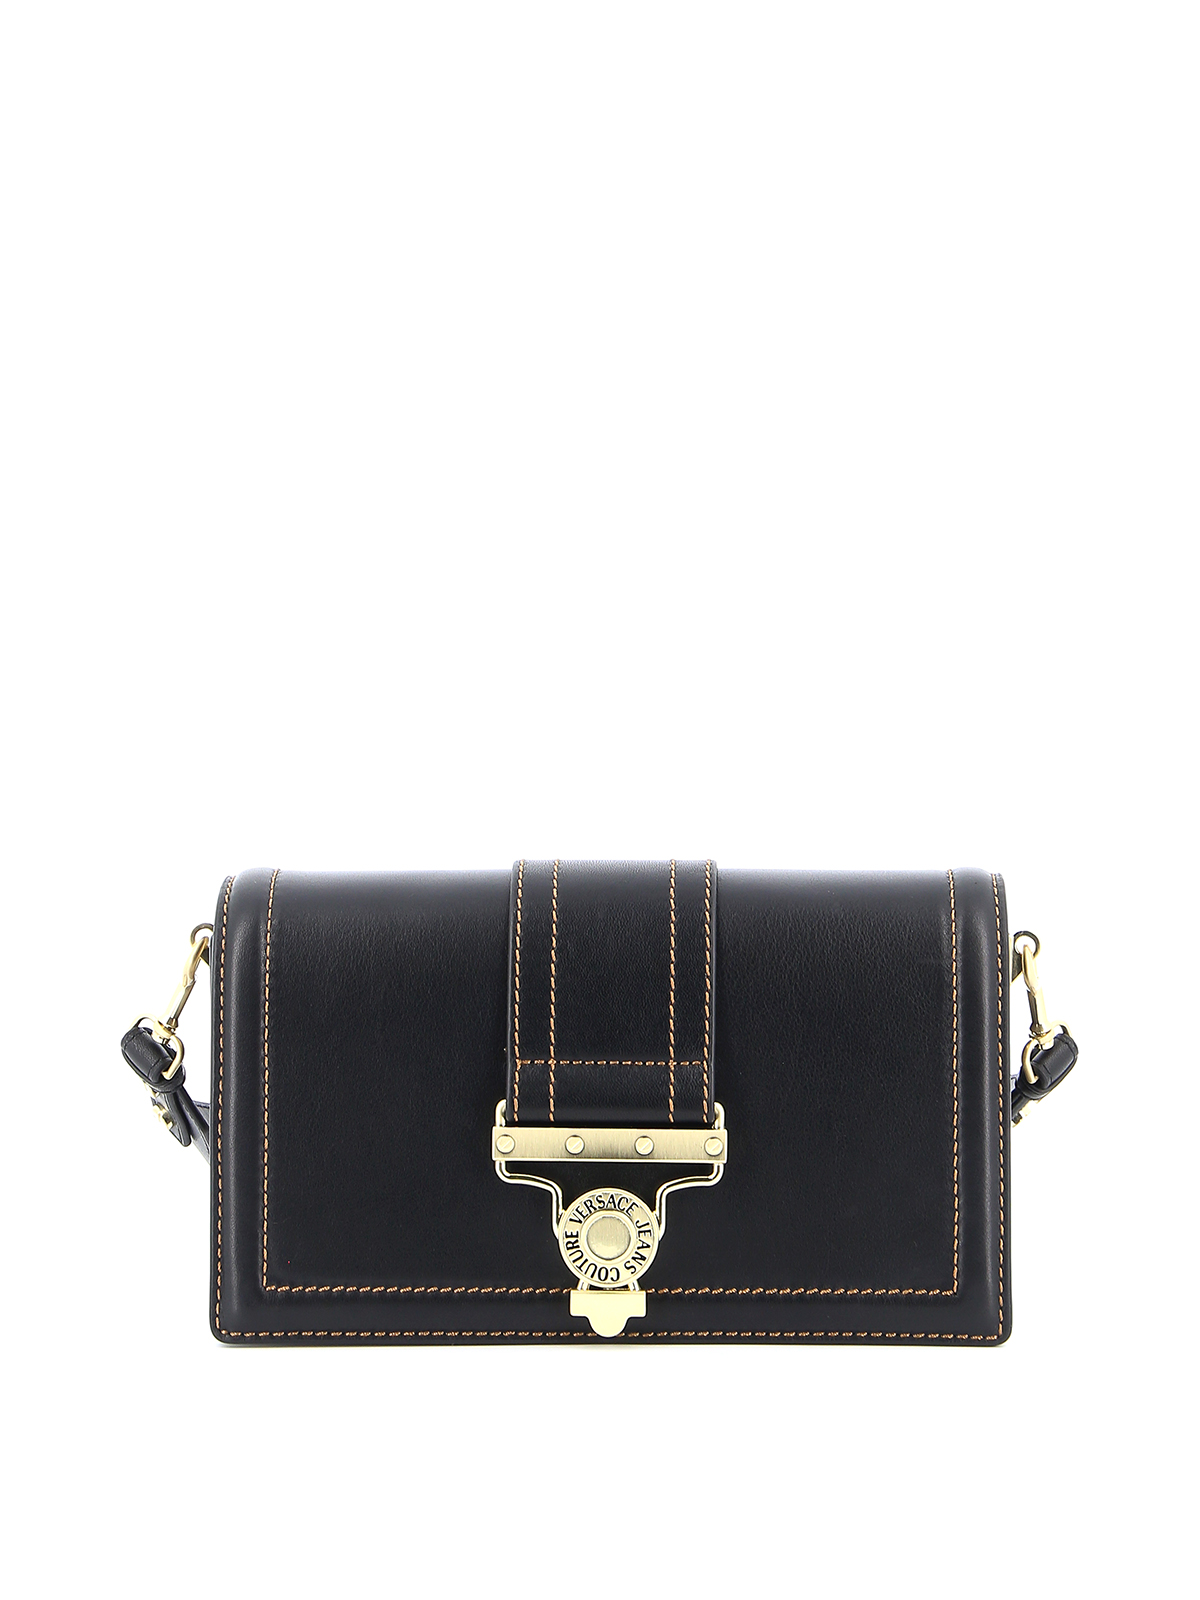 VERSACE JEANS CONTRASTING STITCHINGS LEATHER BAG